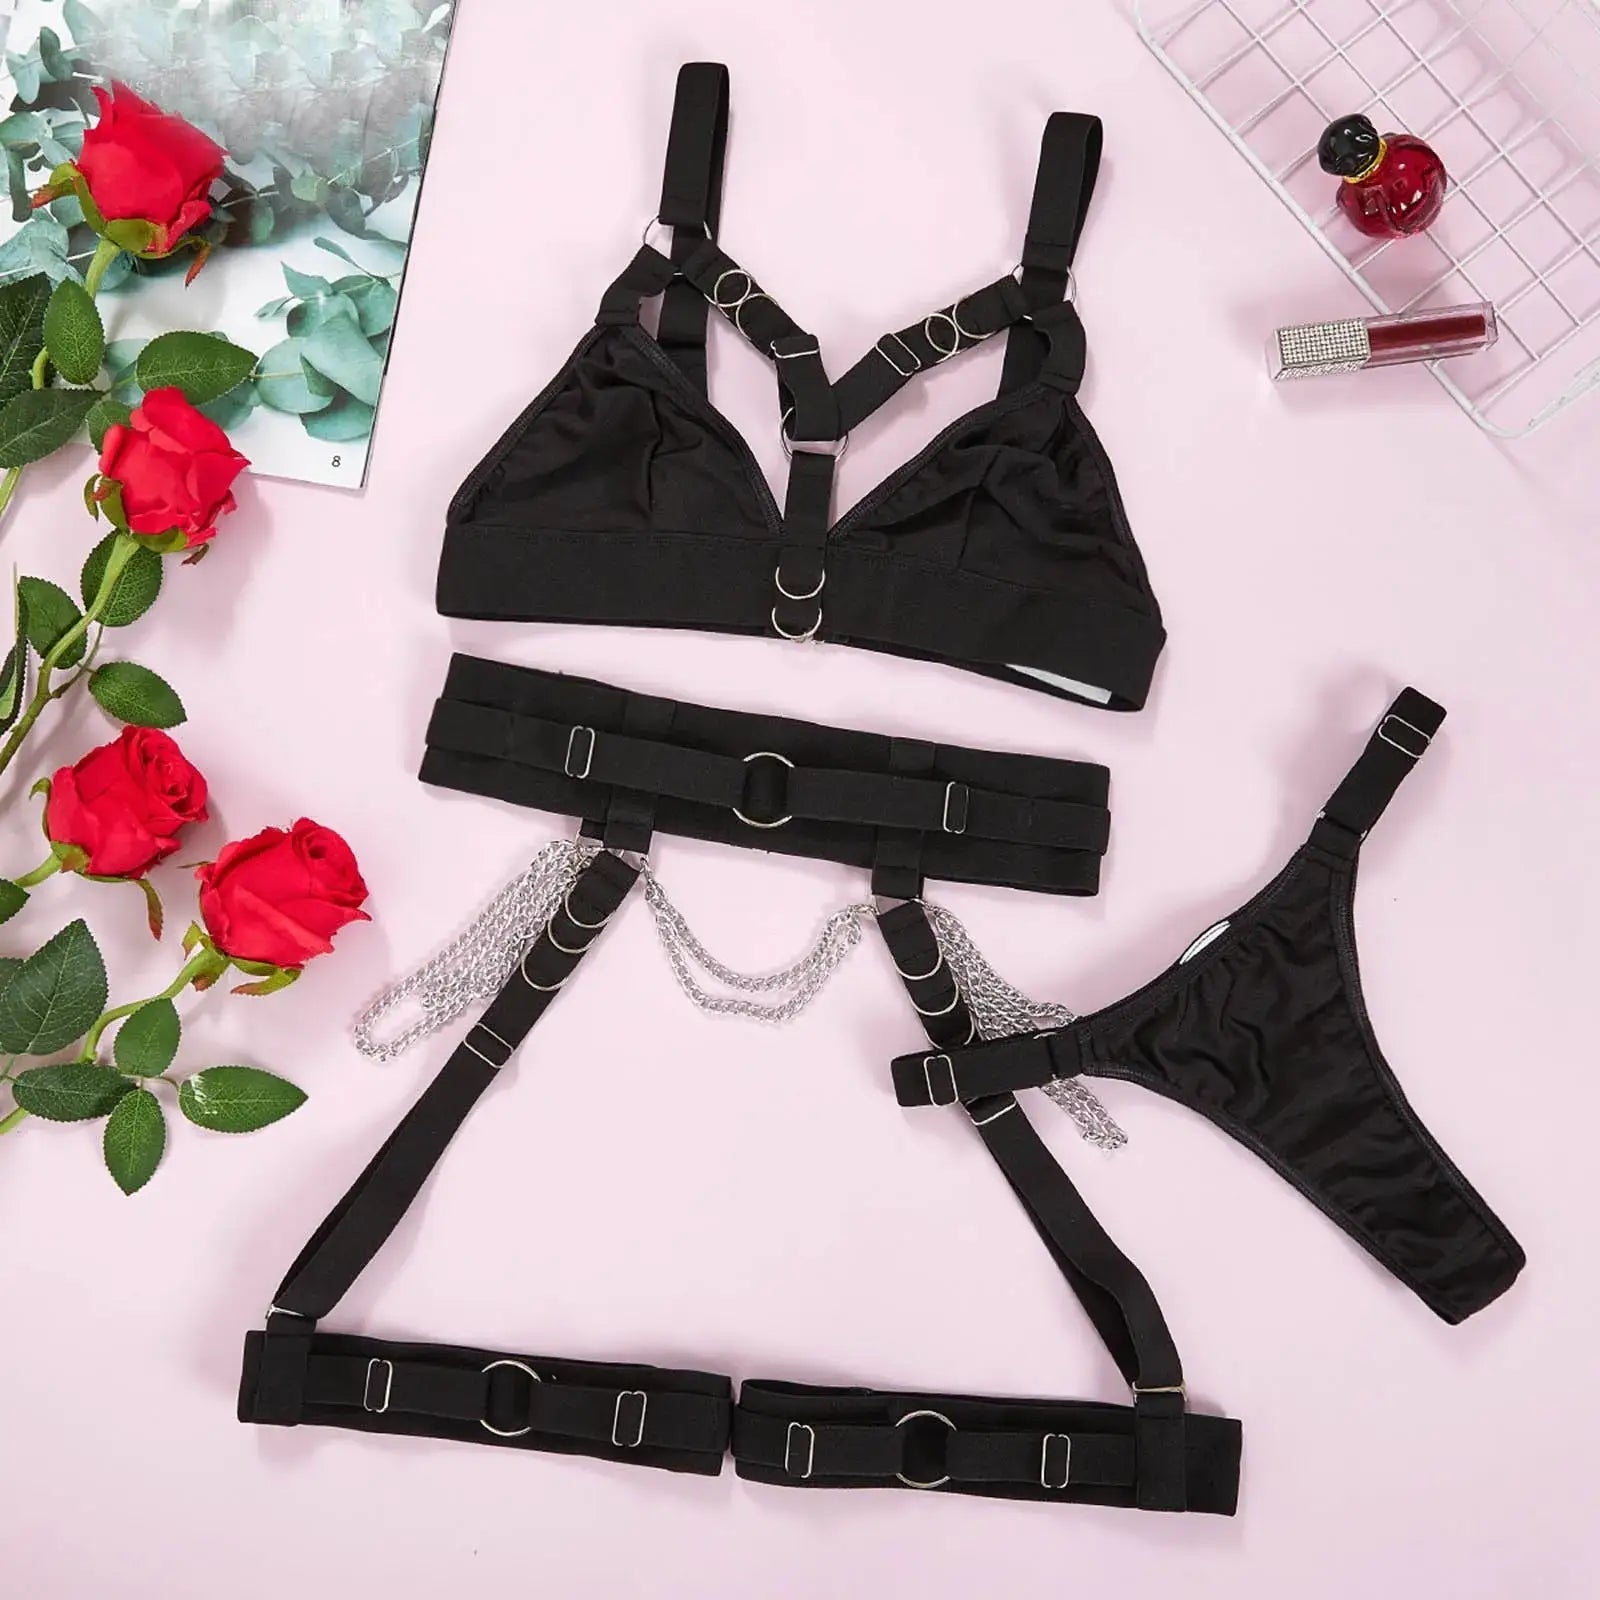 Lingerie clothing 4-piece harness style black seamless set